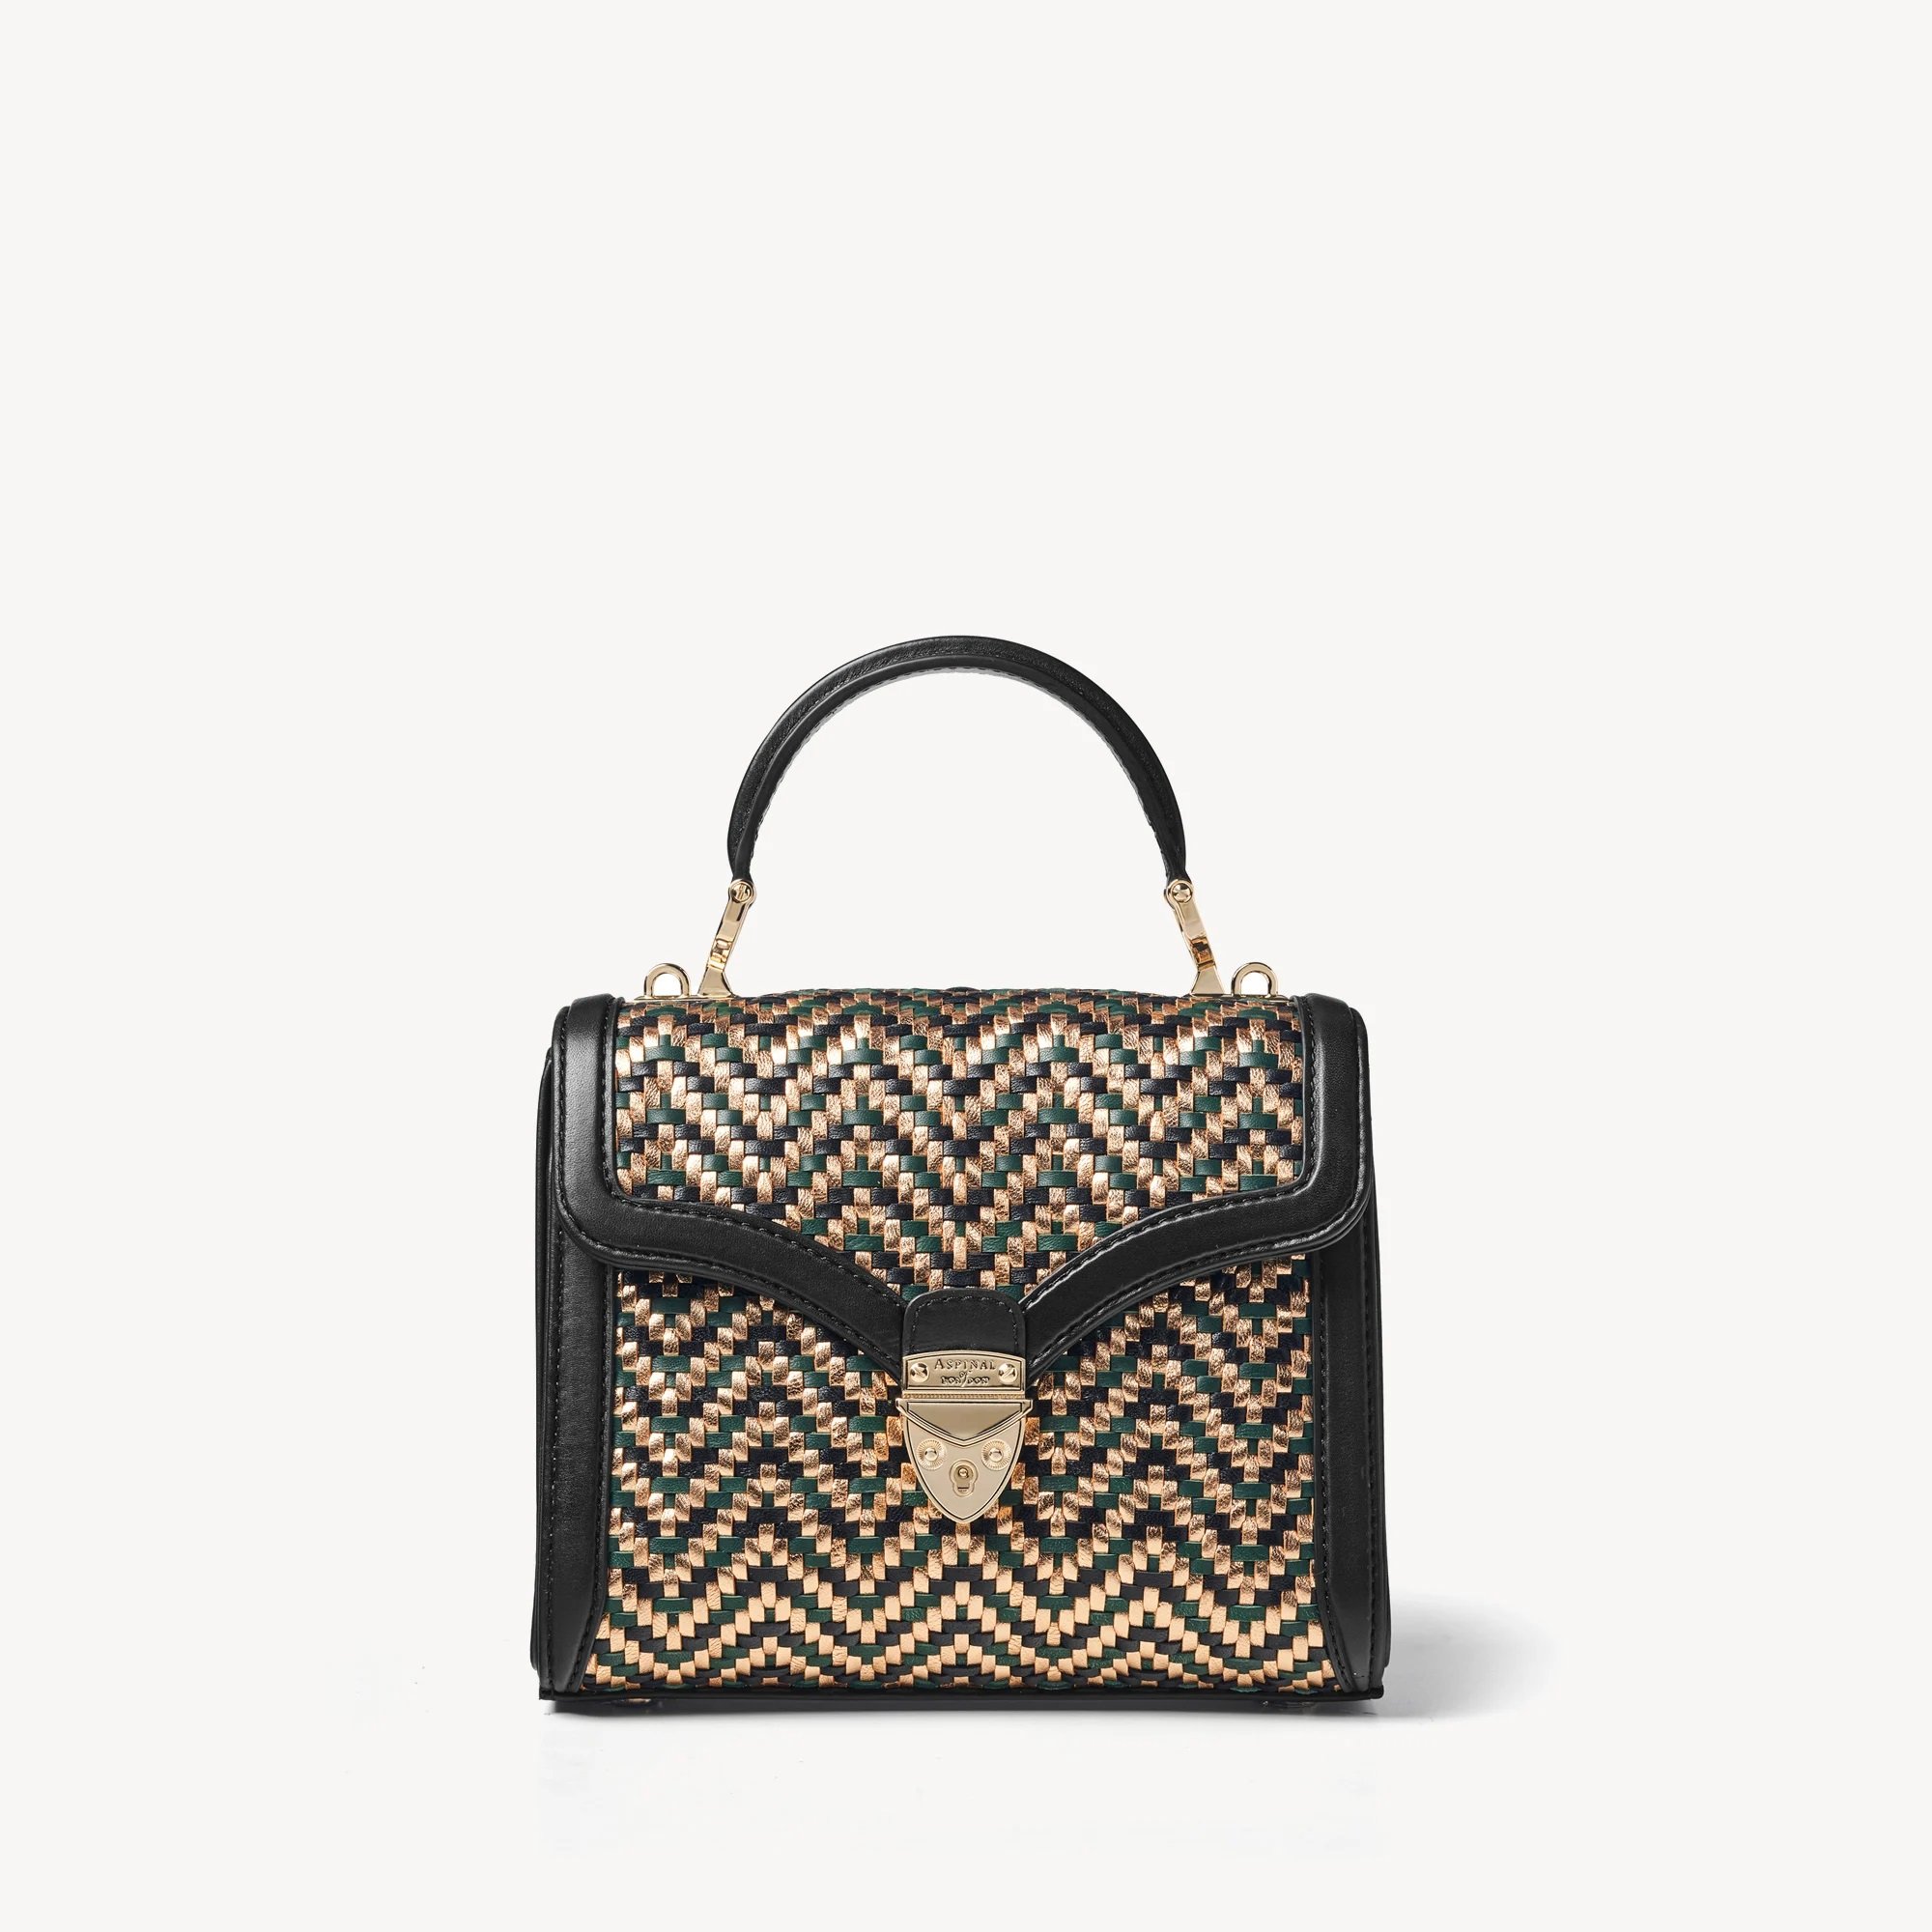 Aspinal of London Midi Mayfair Bag in Champagne, Green & Black Woven Leather.jpg